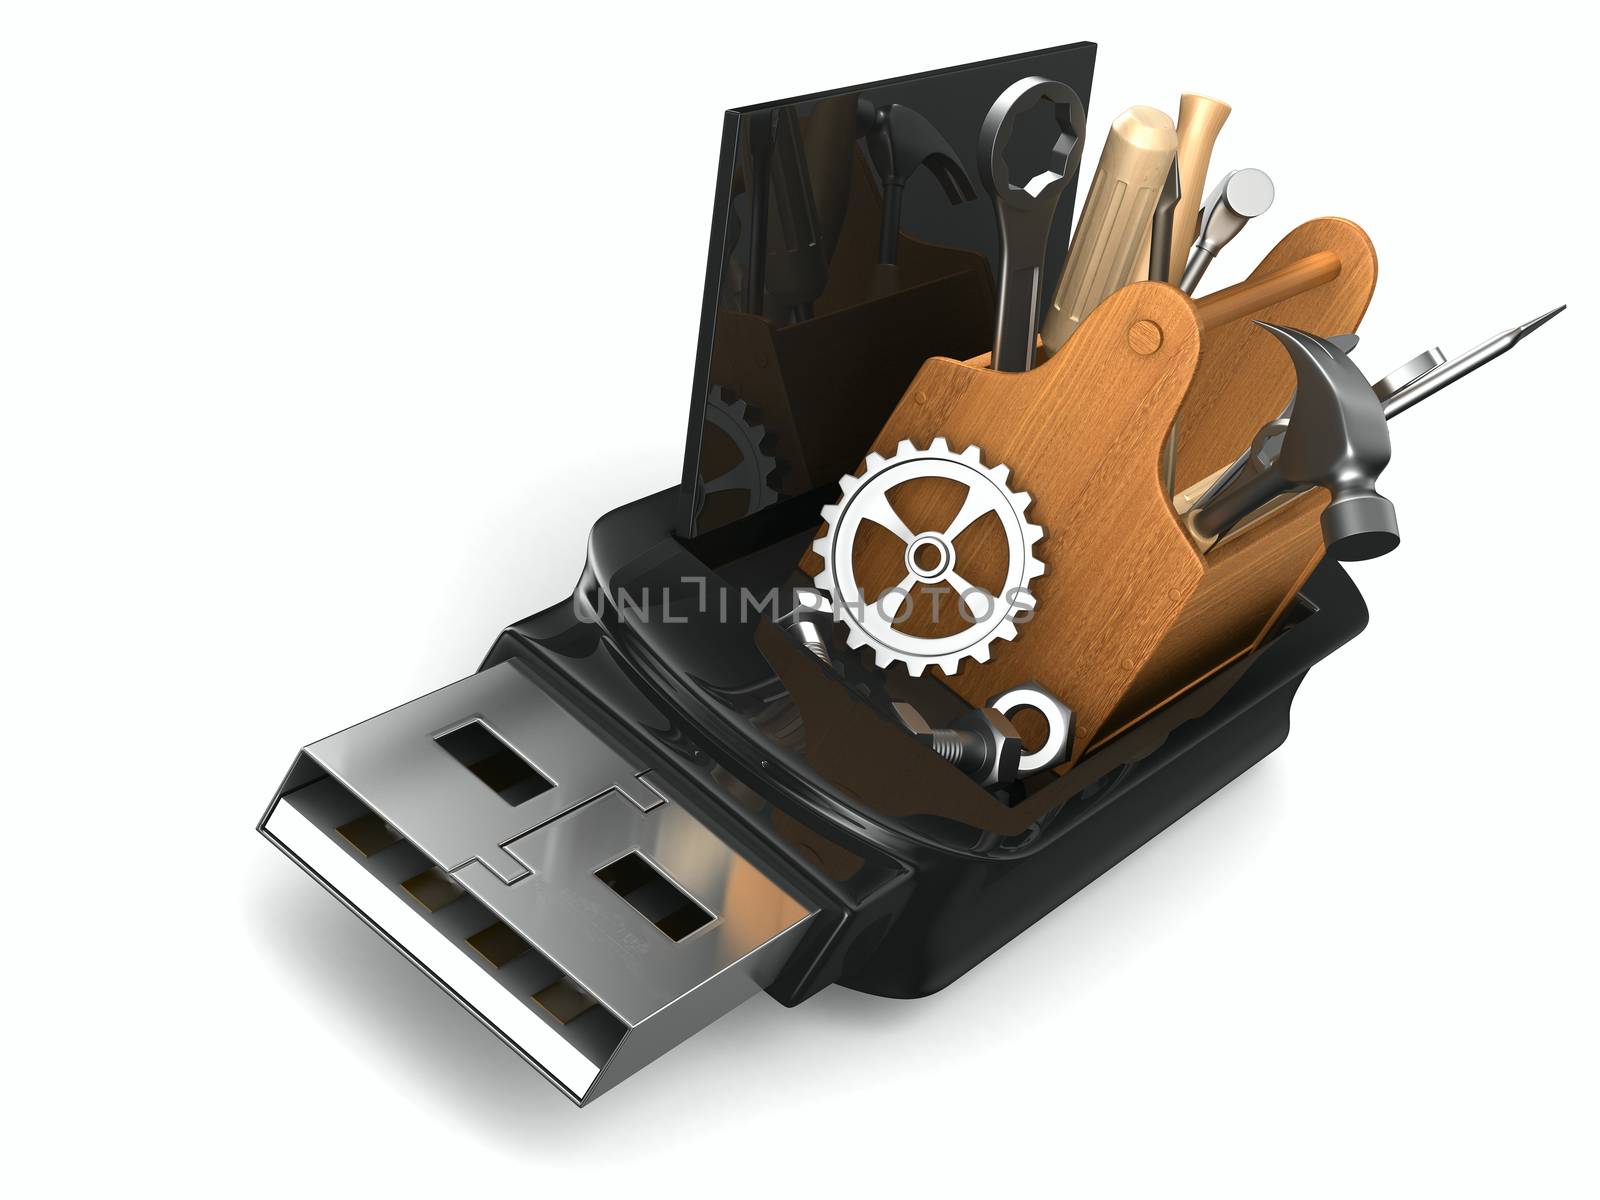 rescue usb flash drive on white background. Isolated 3D image by ISerg